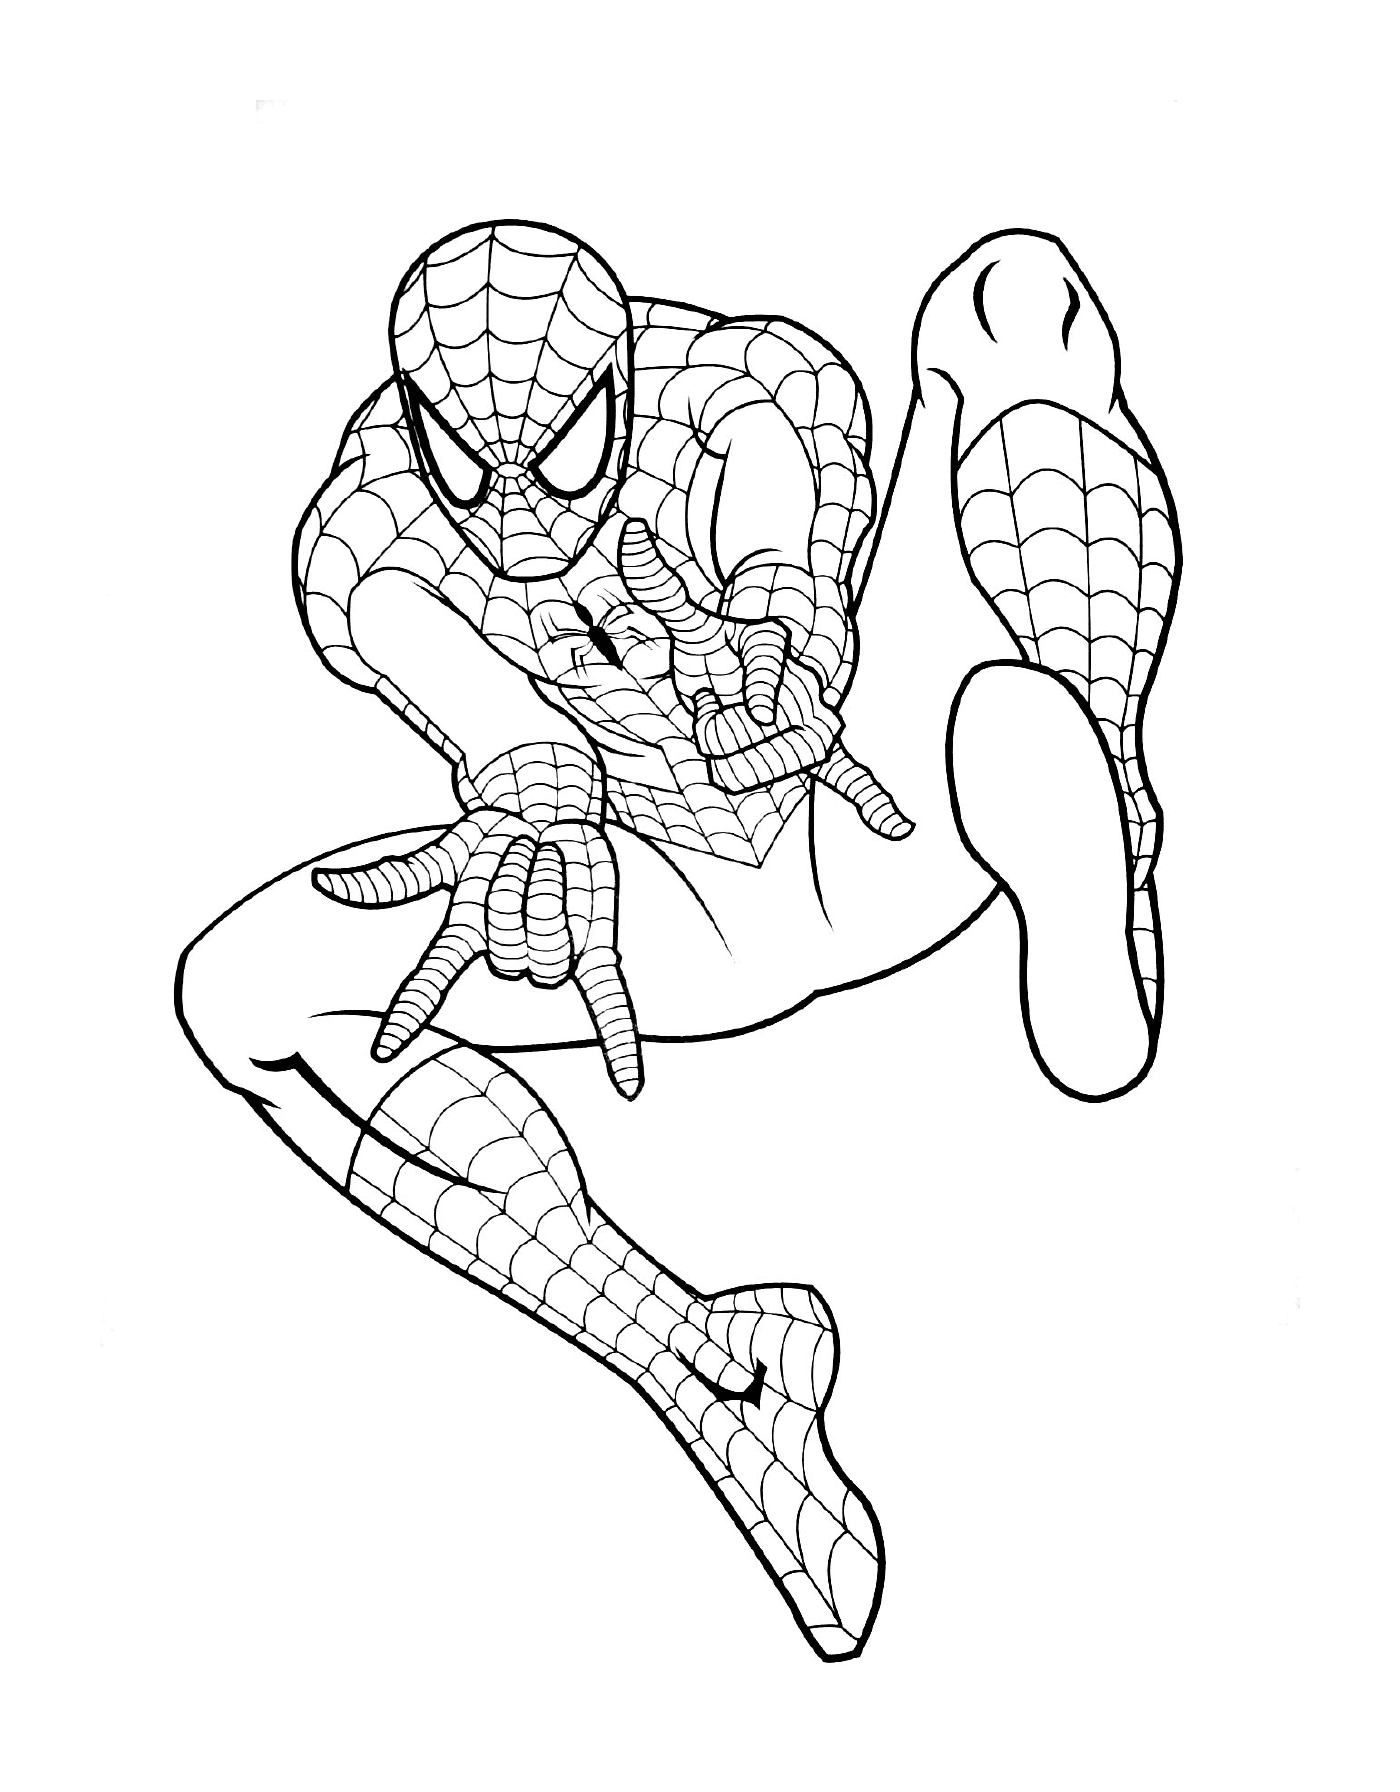  Spider-Man 33 to color 